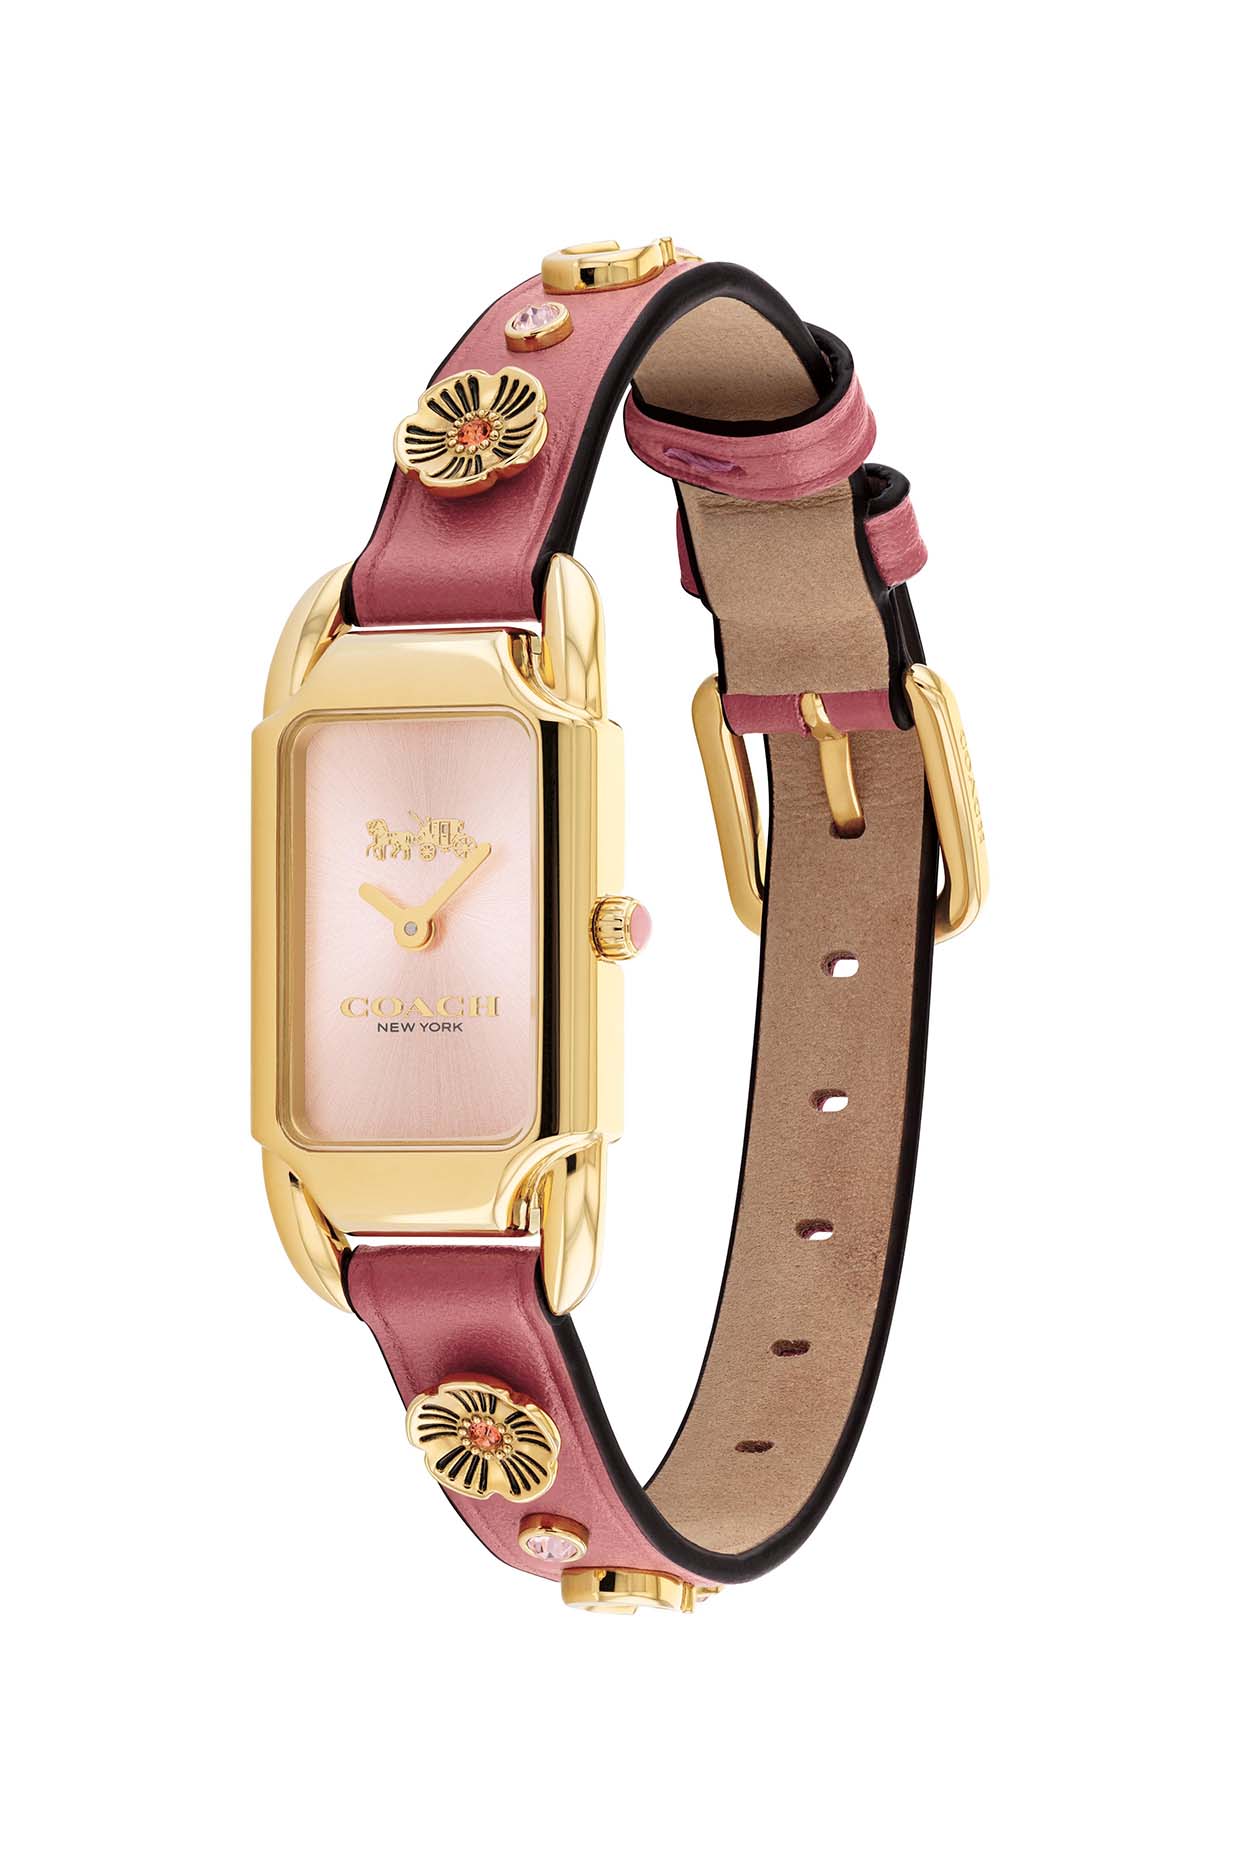 COACH womens watch NCCO14503626 Online at Best Price|watchbrand.in